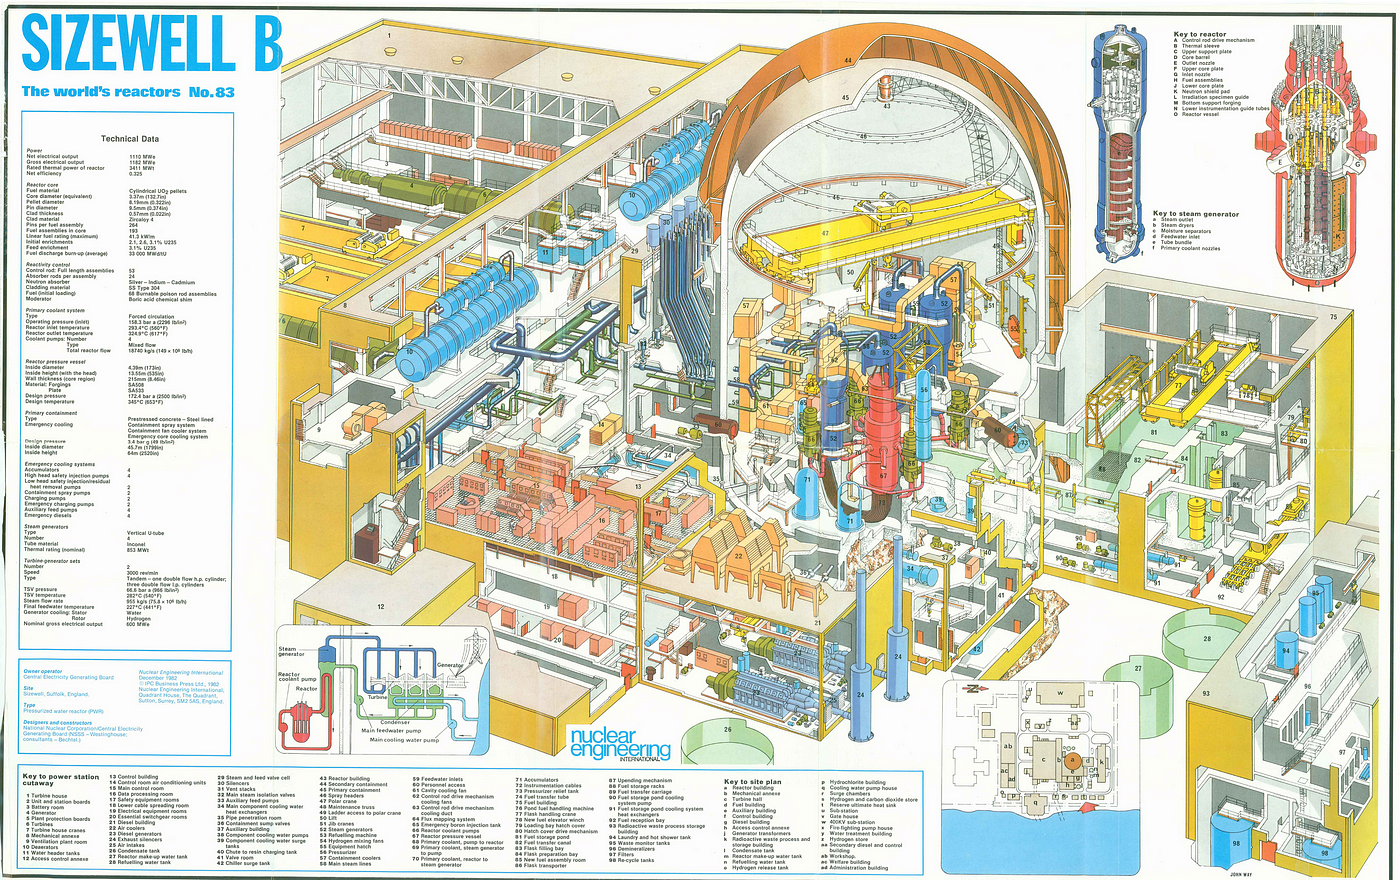 A cutaway drawing showing the inner workings of Sizewell B nuclear power station